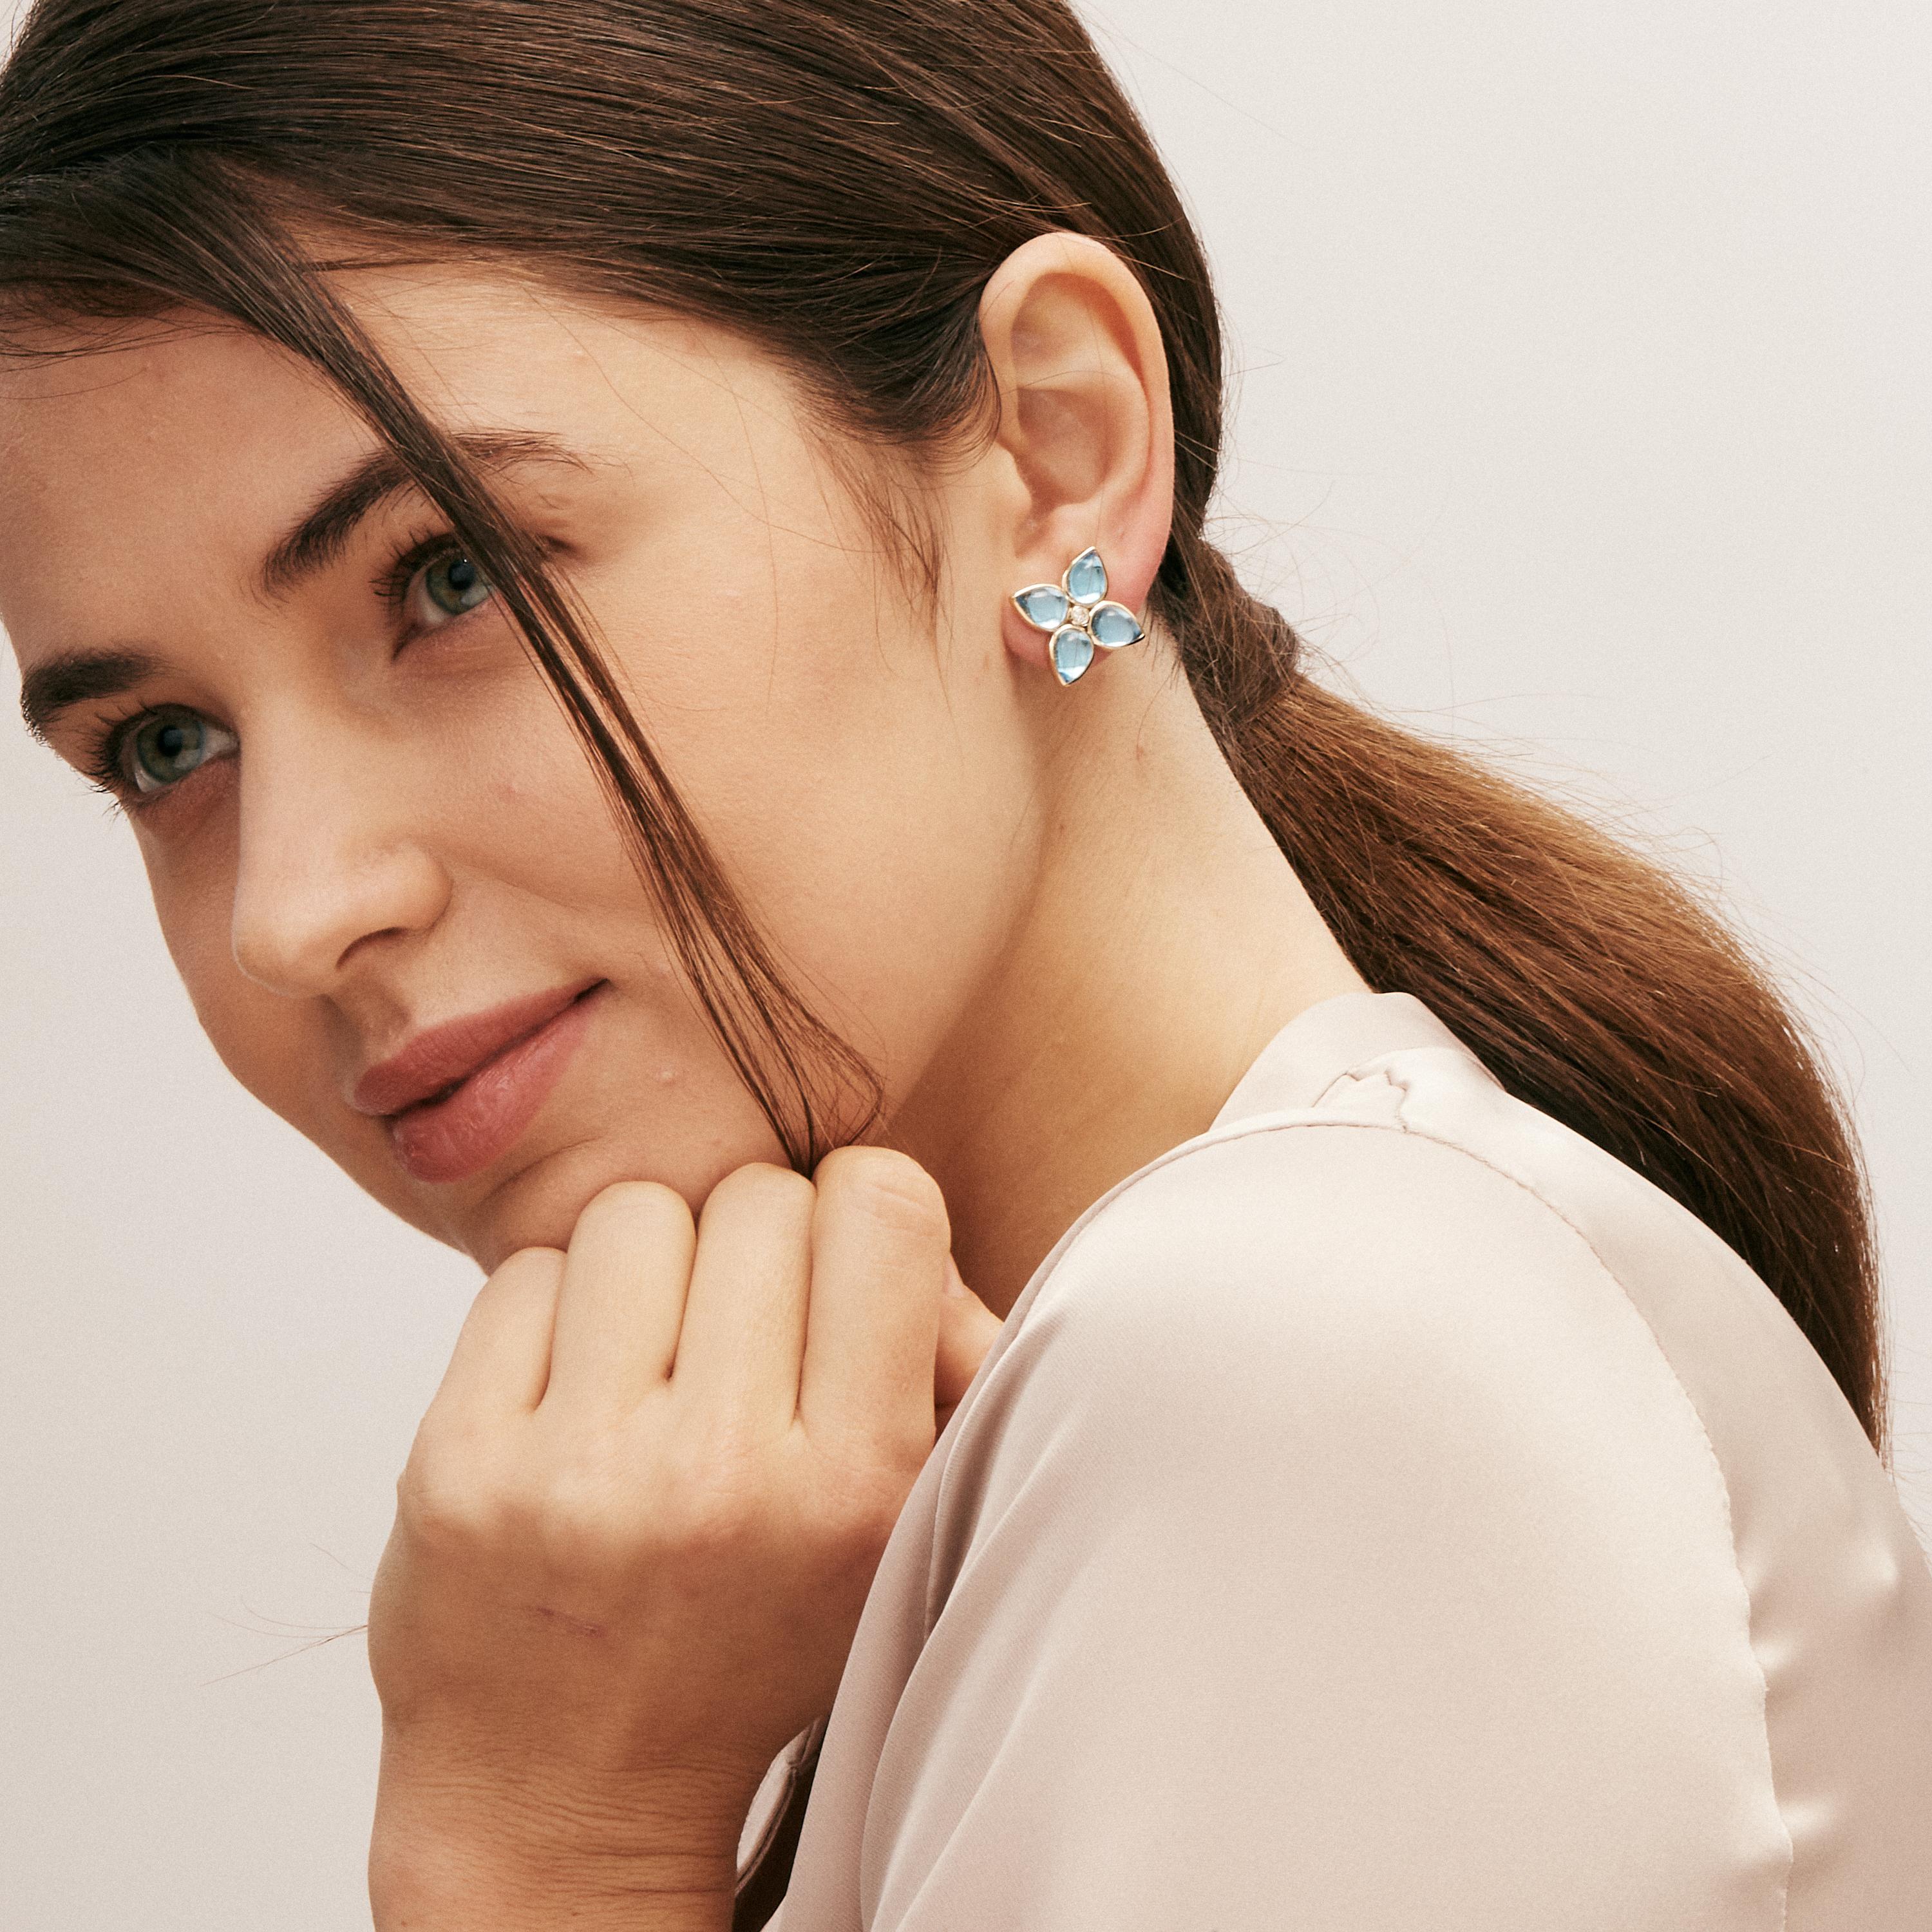 Created in 18 karat yellow gold
Blue topaz 12 carats approx.
Diamonds 0.09 carat approx.
Post backs for pierced ears
Limited edition


Crafted of 18 karat yellow gold, this limited edition earring set features 12 carats of sublime blue topaz and